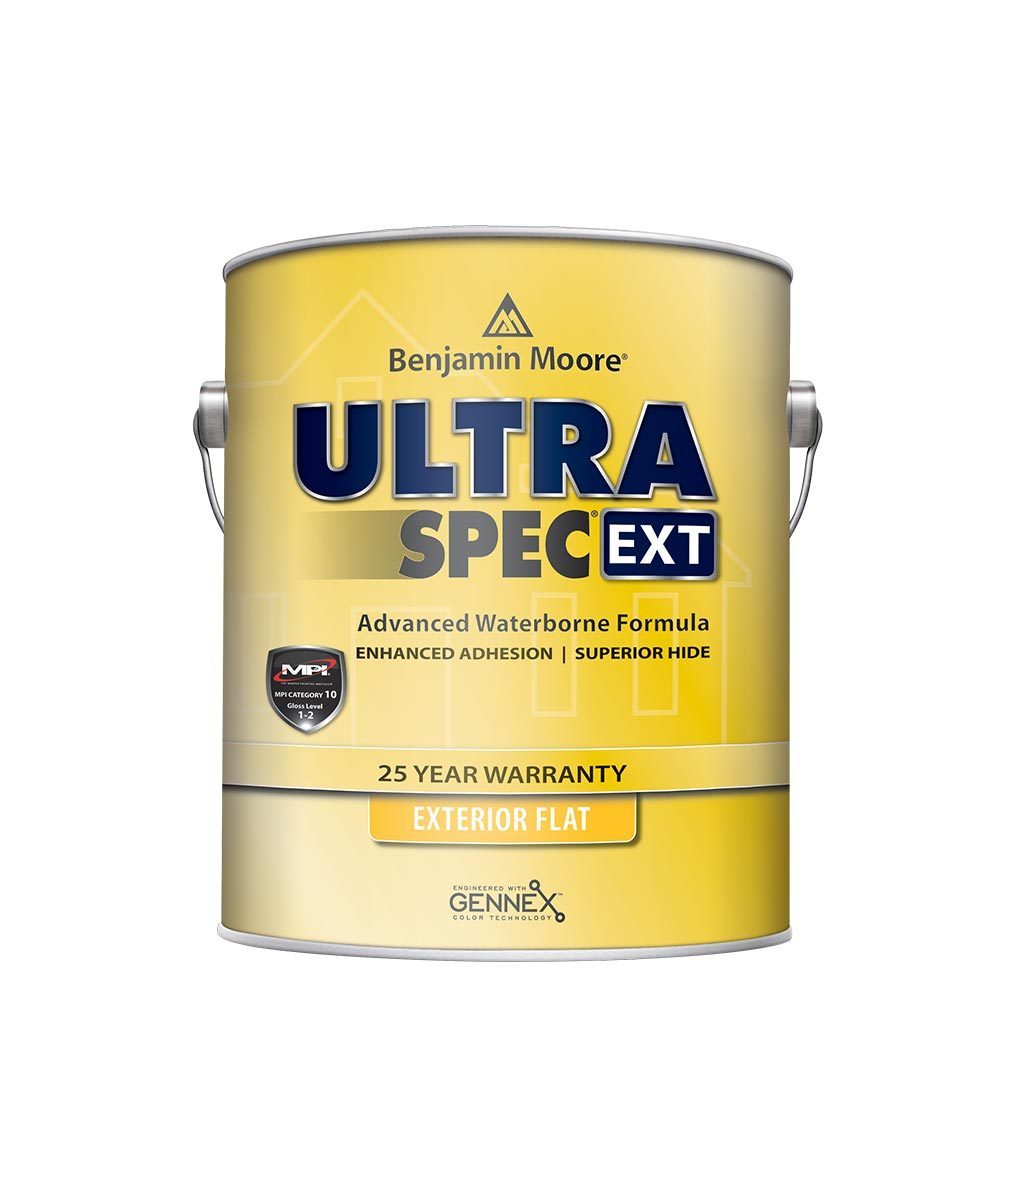 Benjamin Moore Ultra Spec EXT exterior paint in flat finish available at JC Licht.